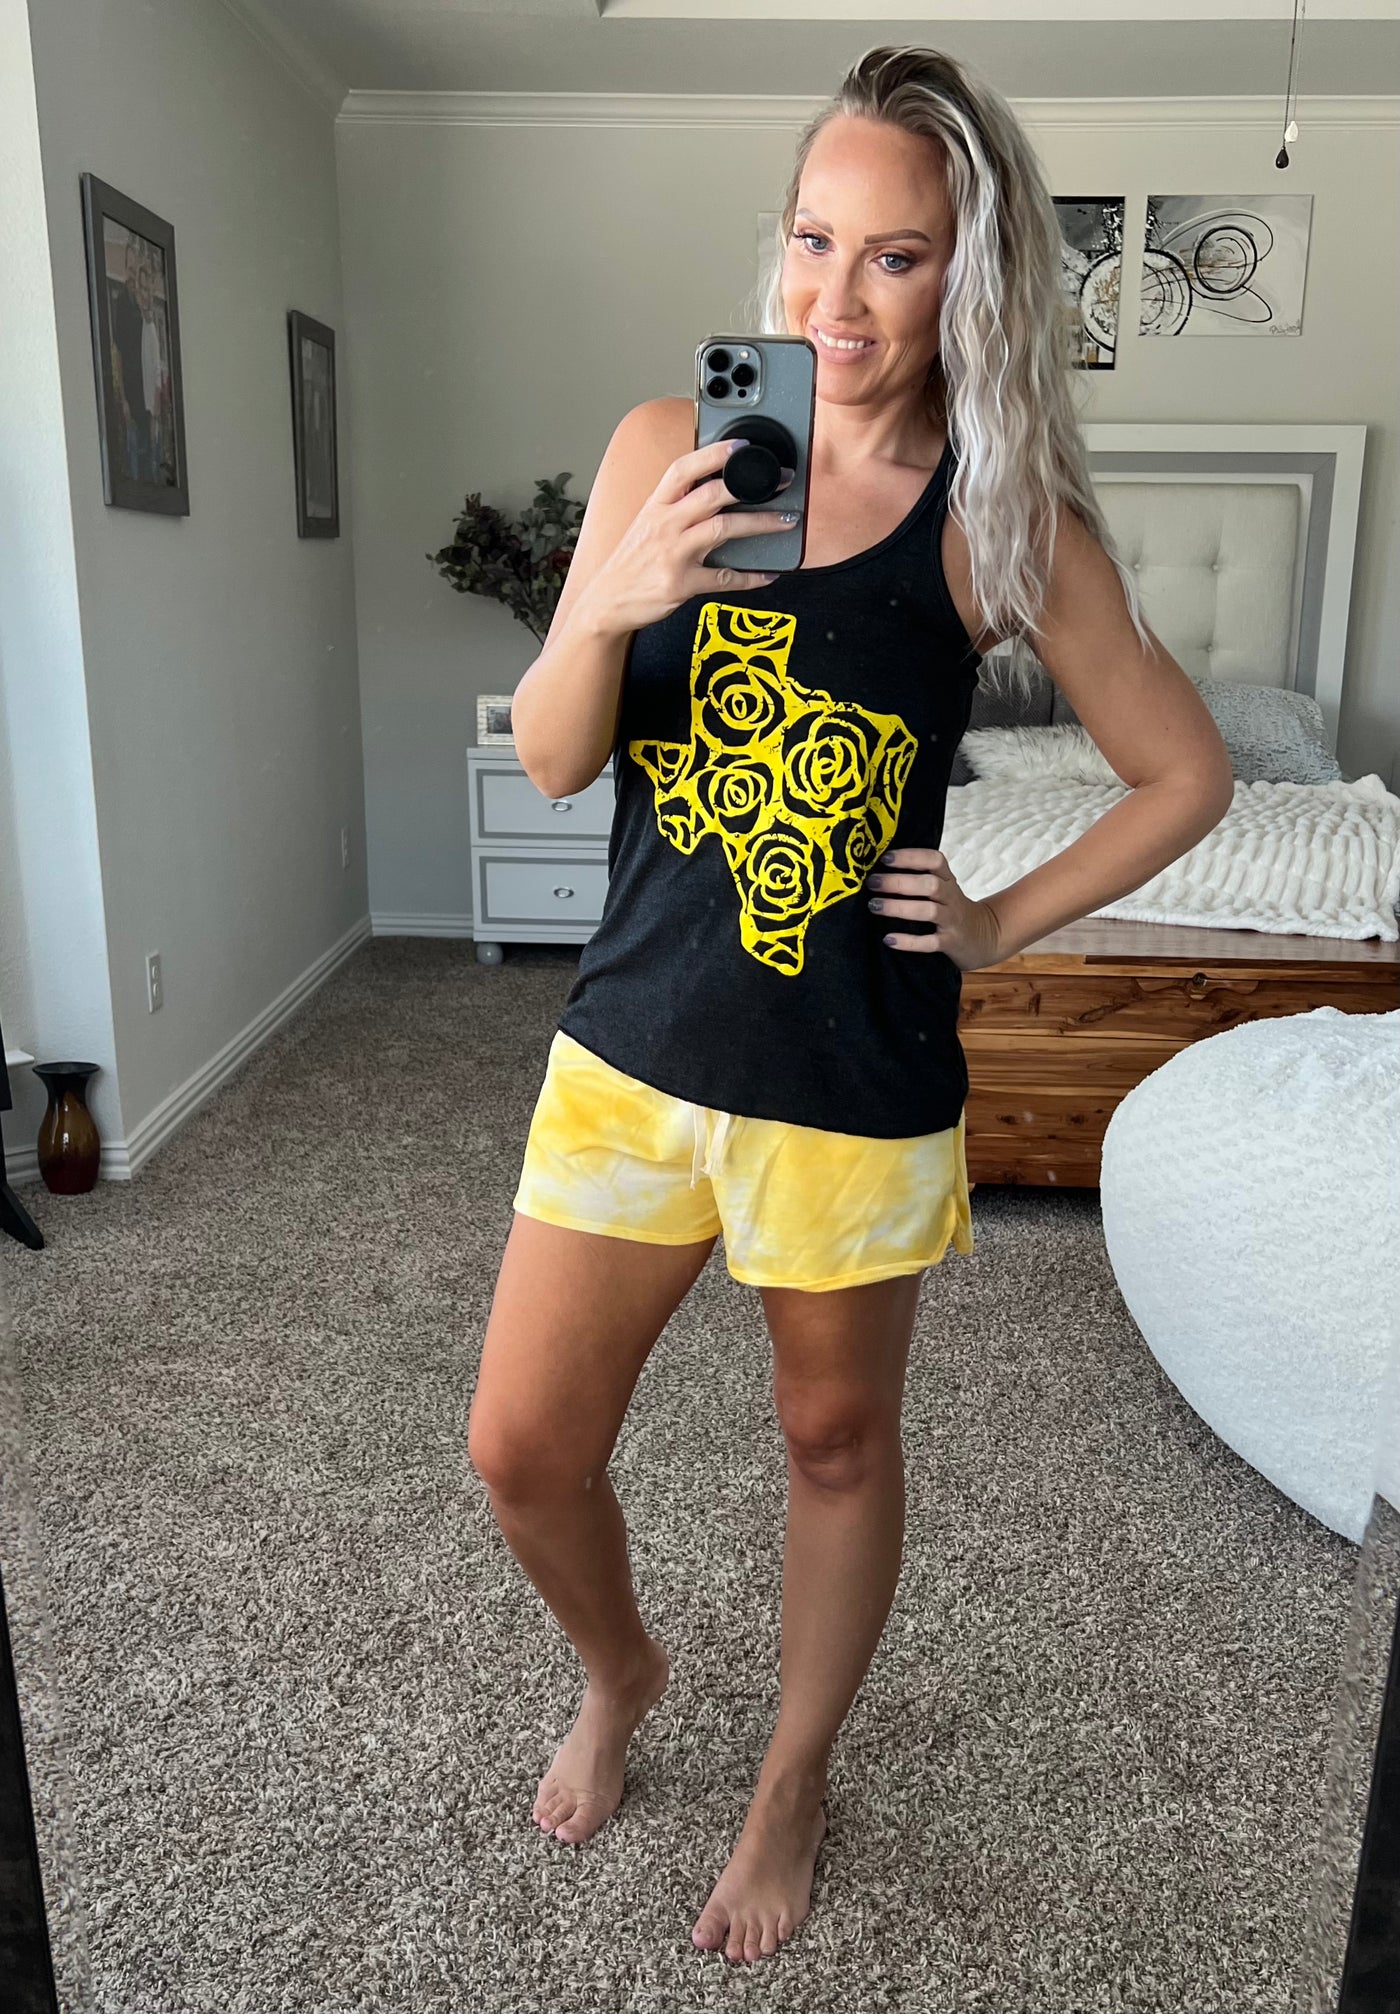 Yellow Rose of Texas Graphic Top